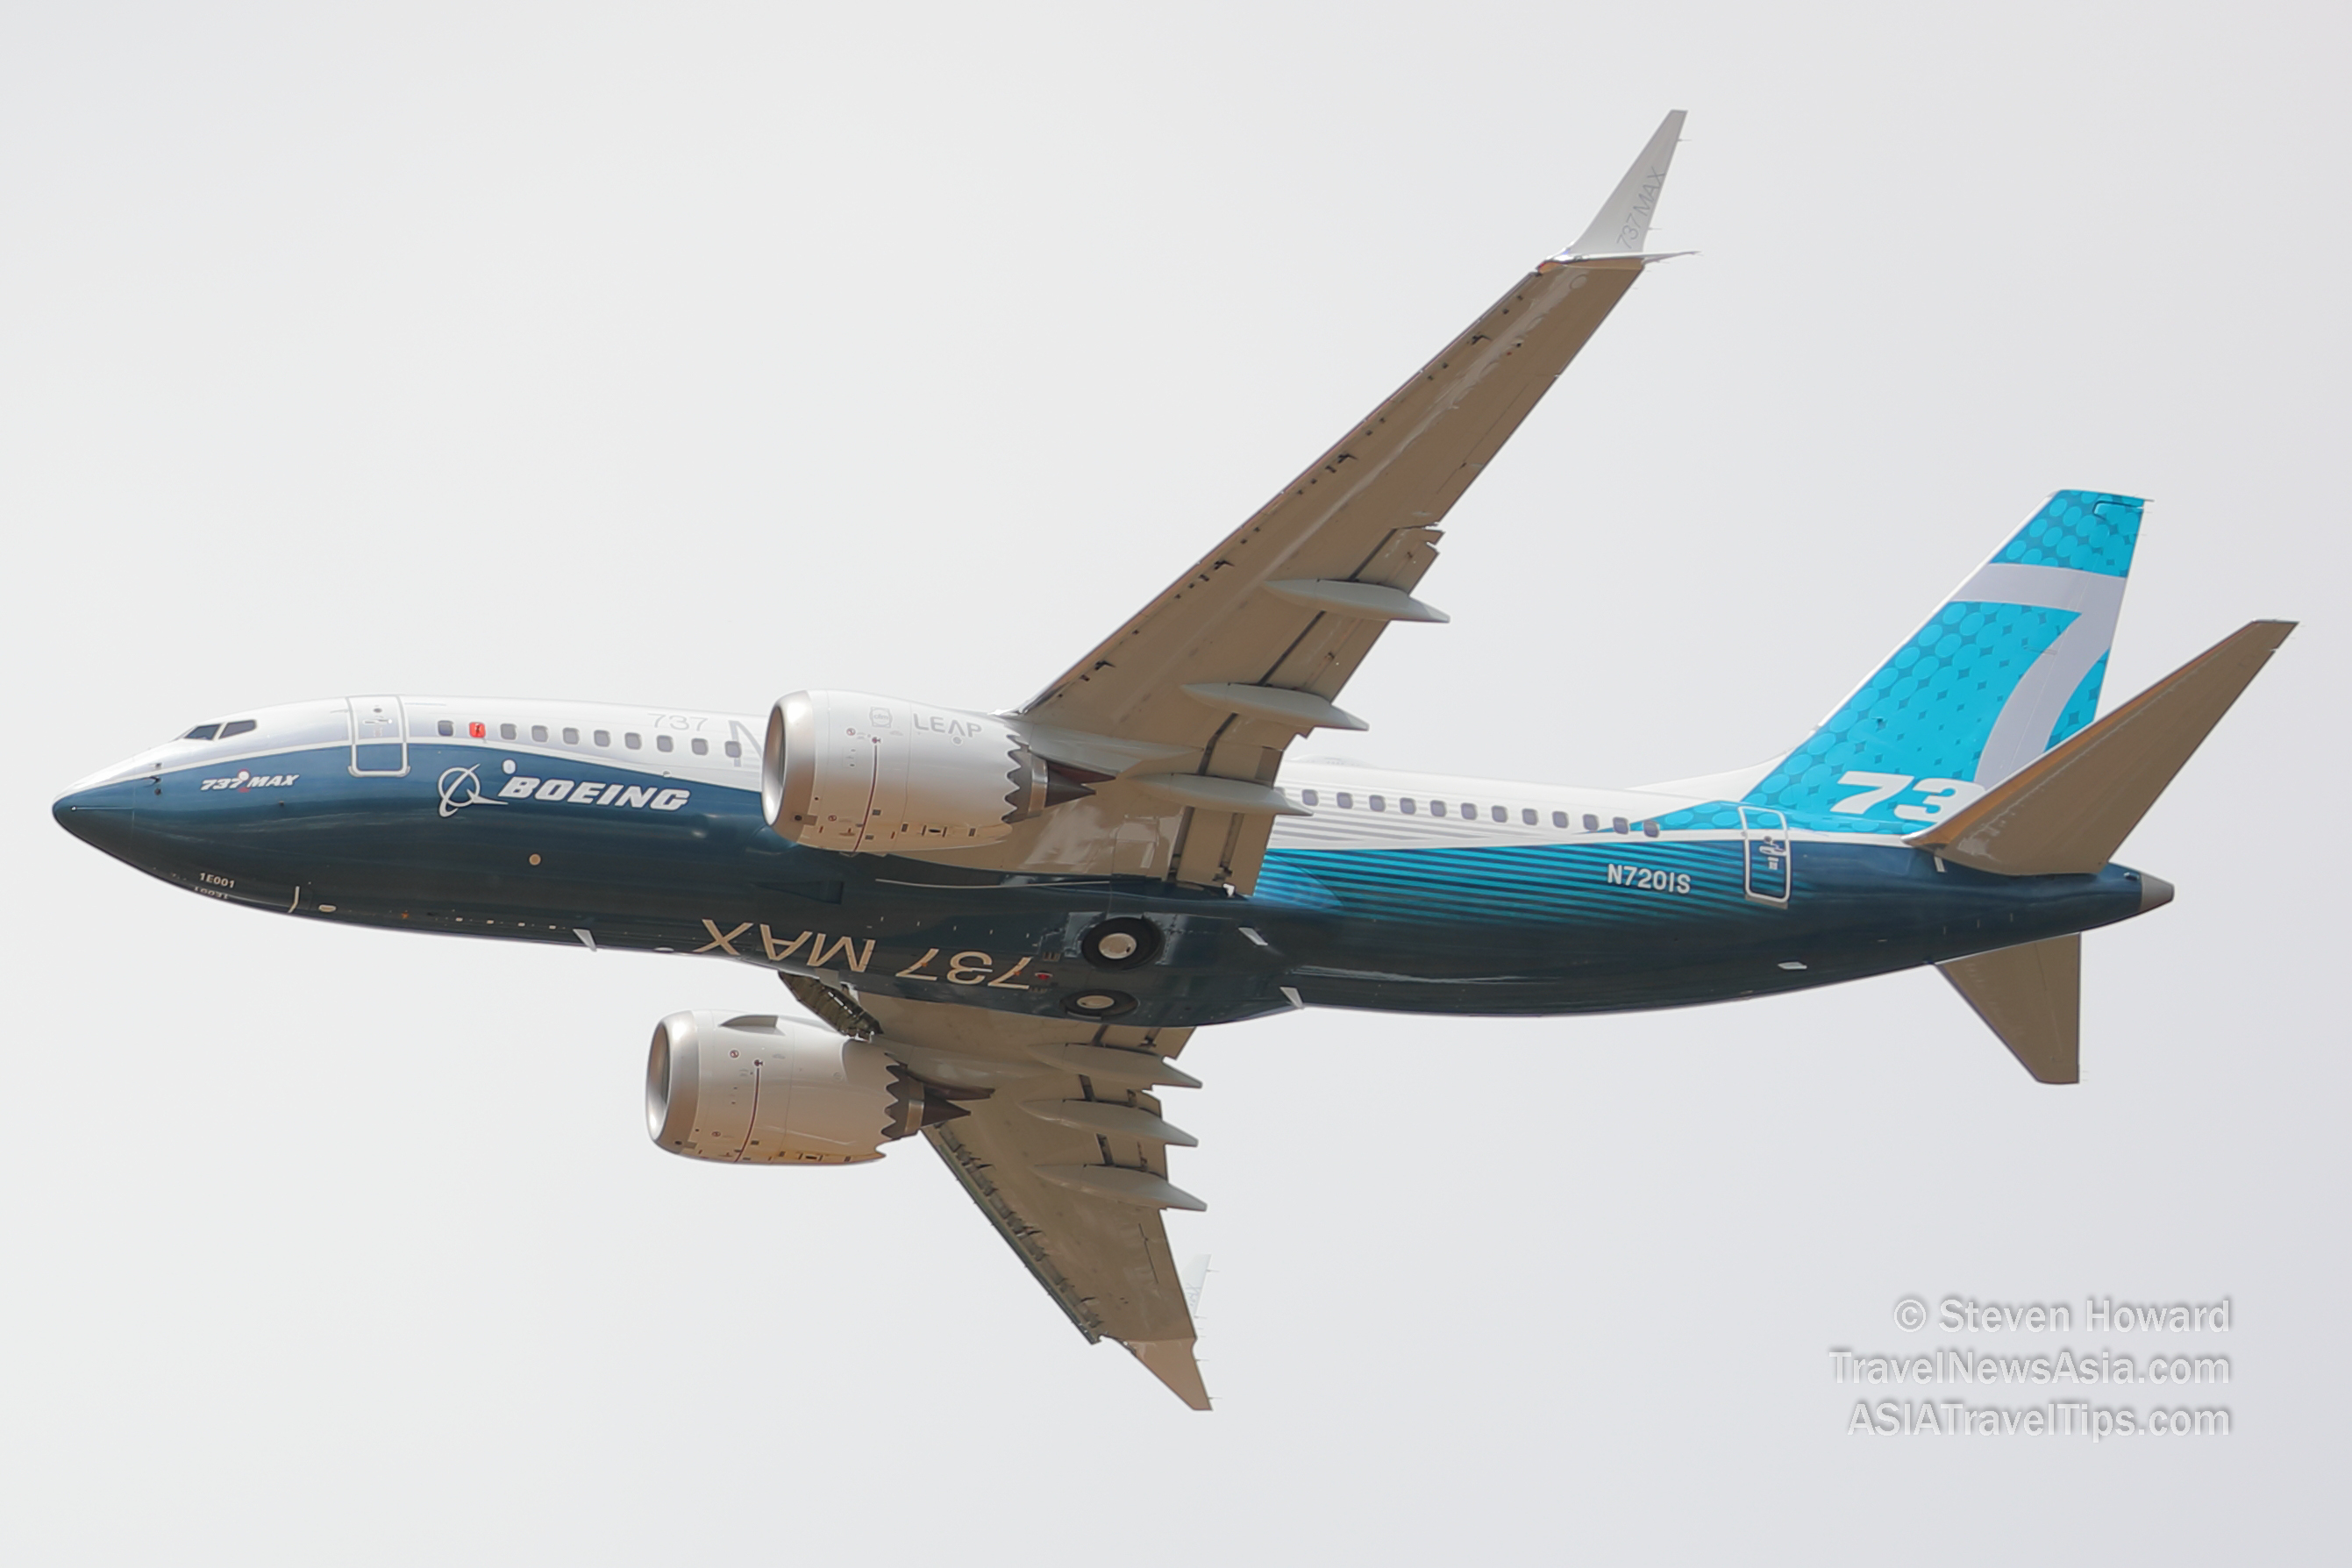 Boeing 737 MAX 7 reg: N720IS. Picture by Steven Howard of TravelNewsAsia.com Click to enlarge.